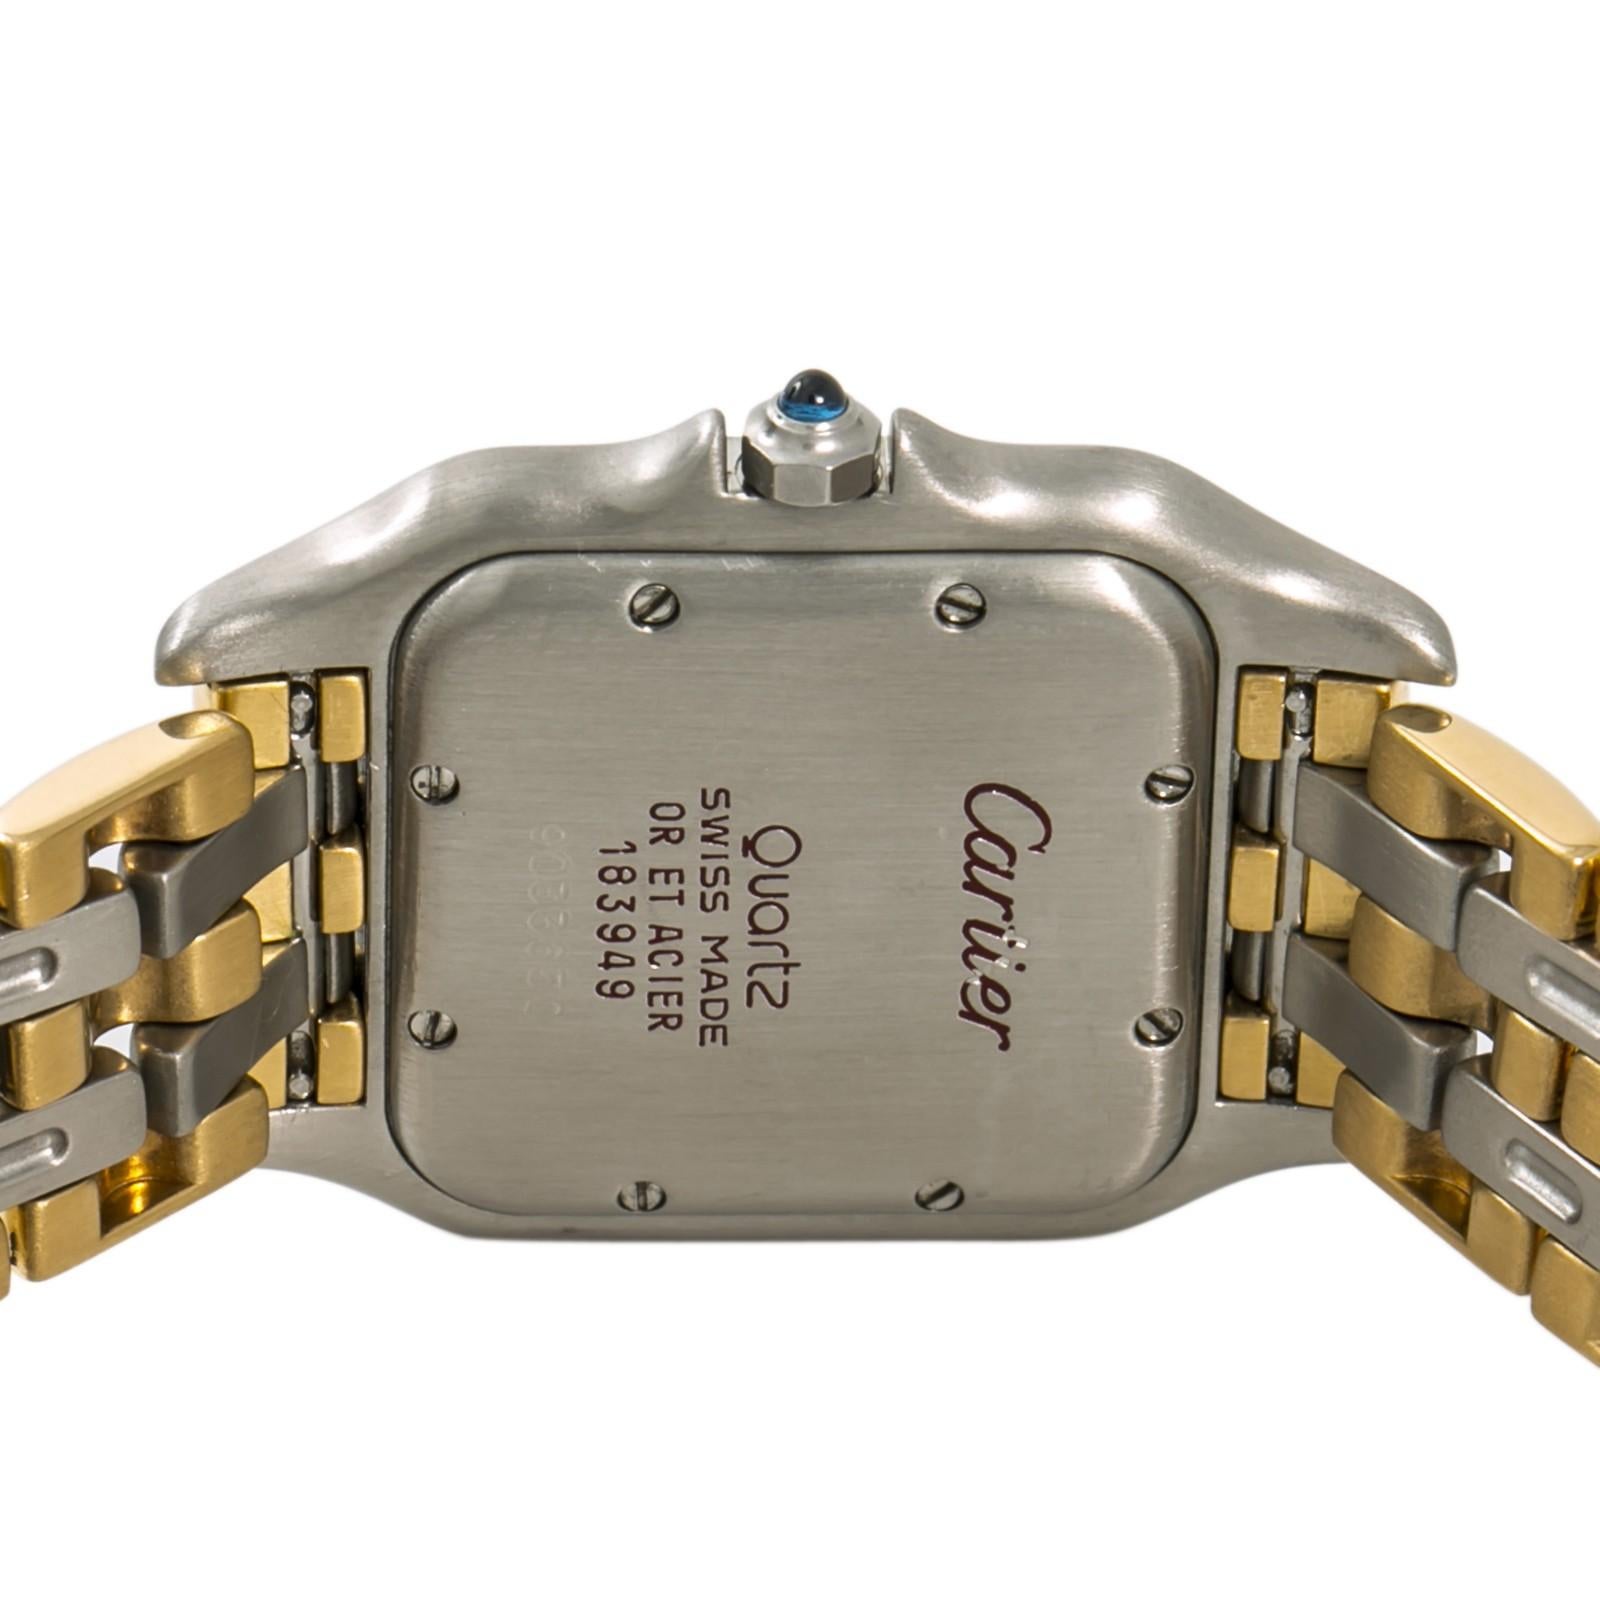 Cartier Panthere de Cartier Reference #:183949. quartz. Verified and Certified by WatchFacts. 1 year warranty offered by WatchFacts.
